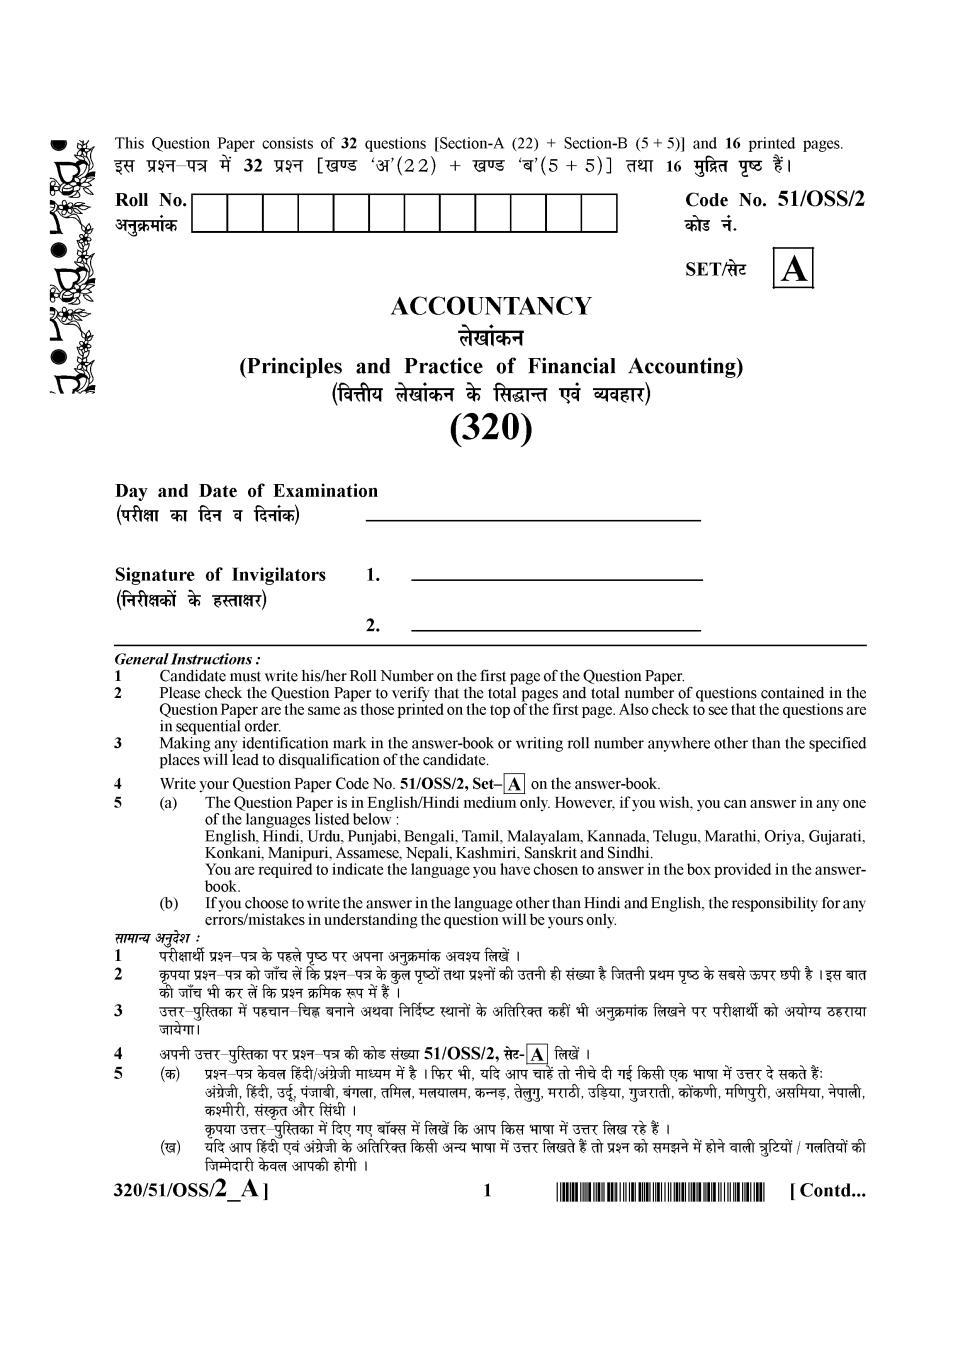 NIOS Class 12 Question Paper Oct 2015 - Accountancy - Page 1